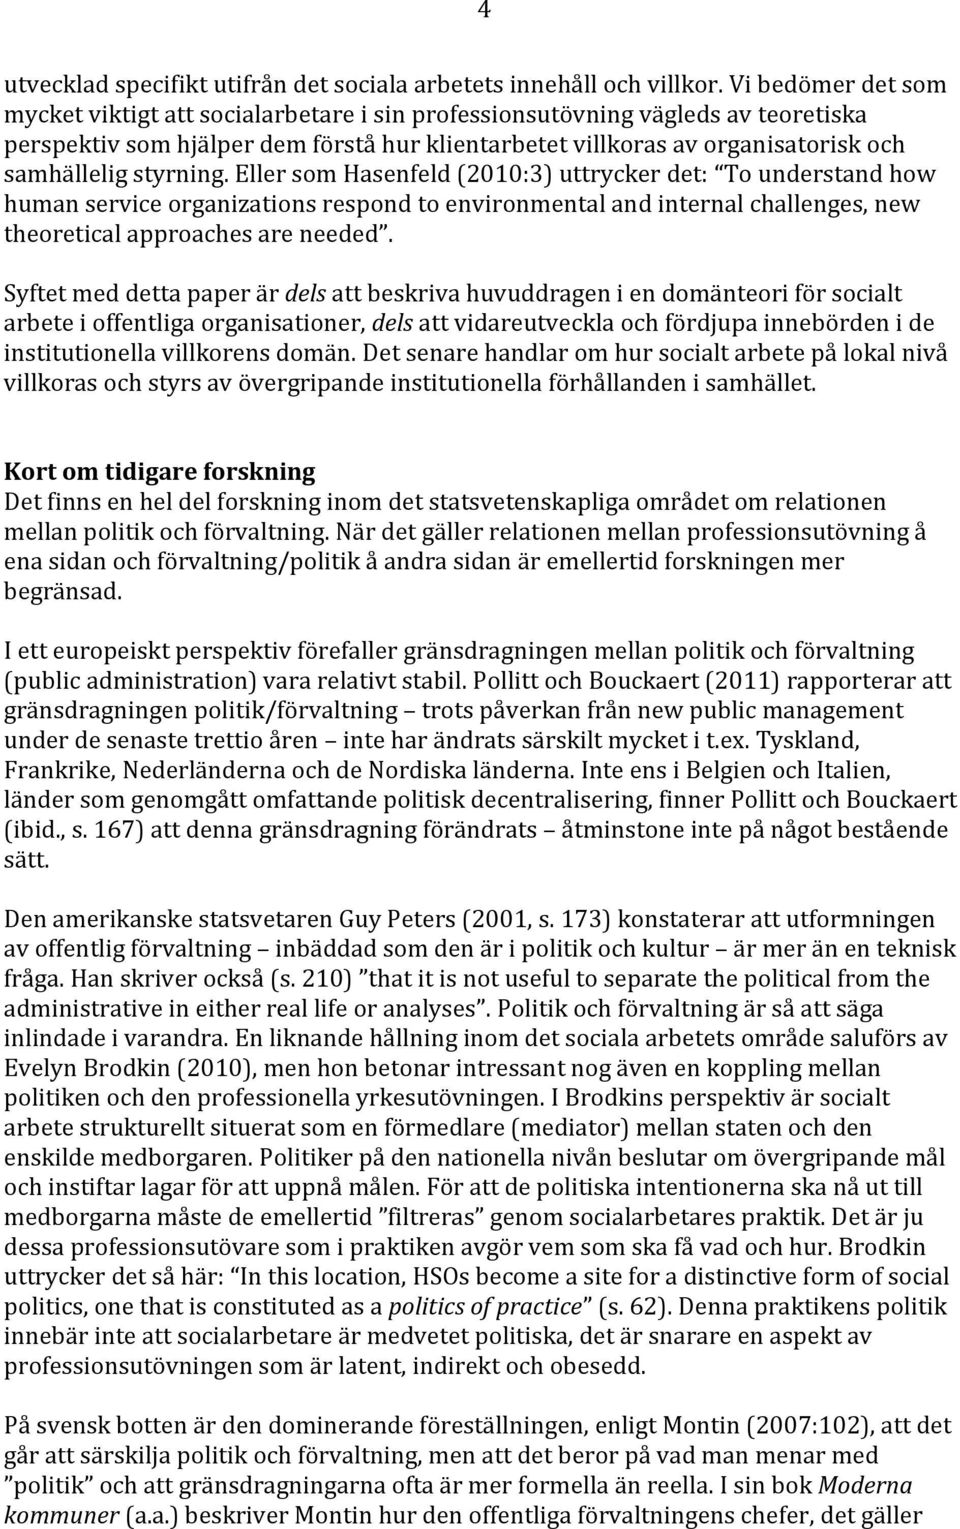 styrning. Eller som Hasenfeld (2010:3) uttrycker det: To understand how human service organizations respond to environmental and internal challenges, new theoretical approaches are needed.